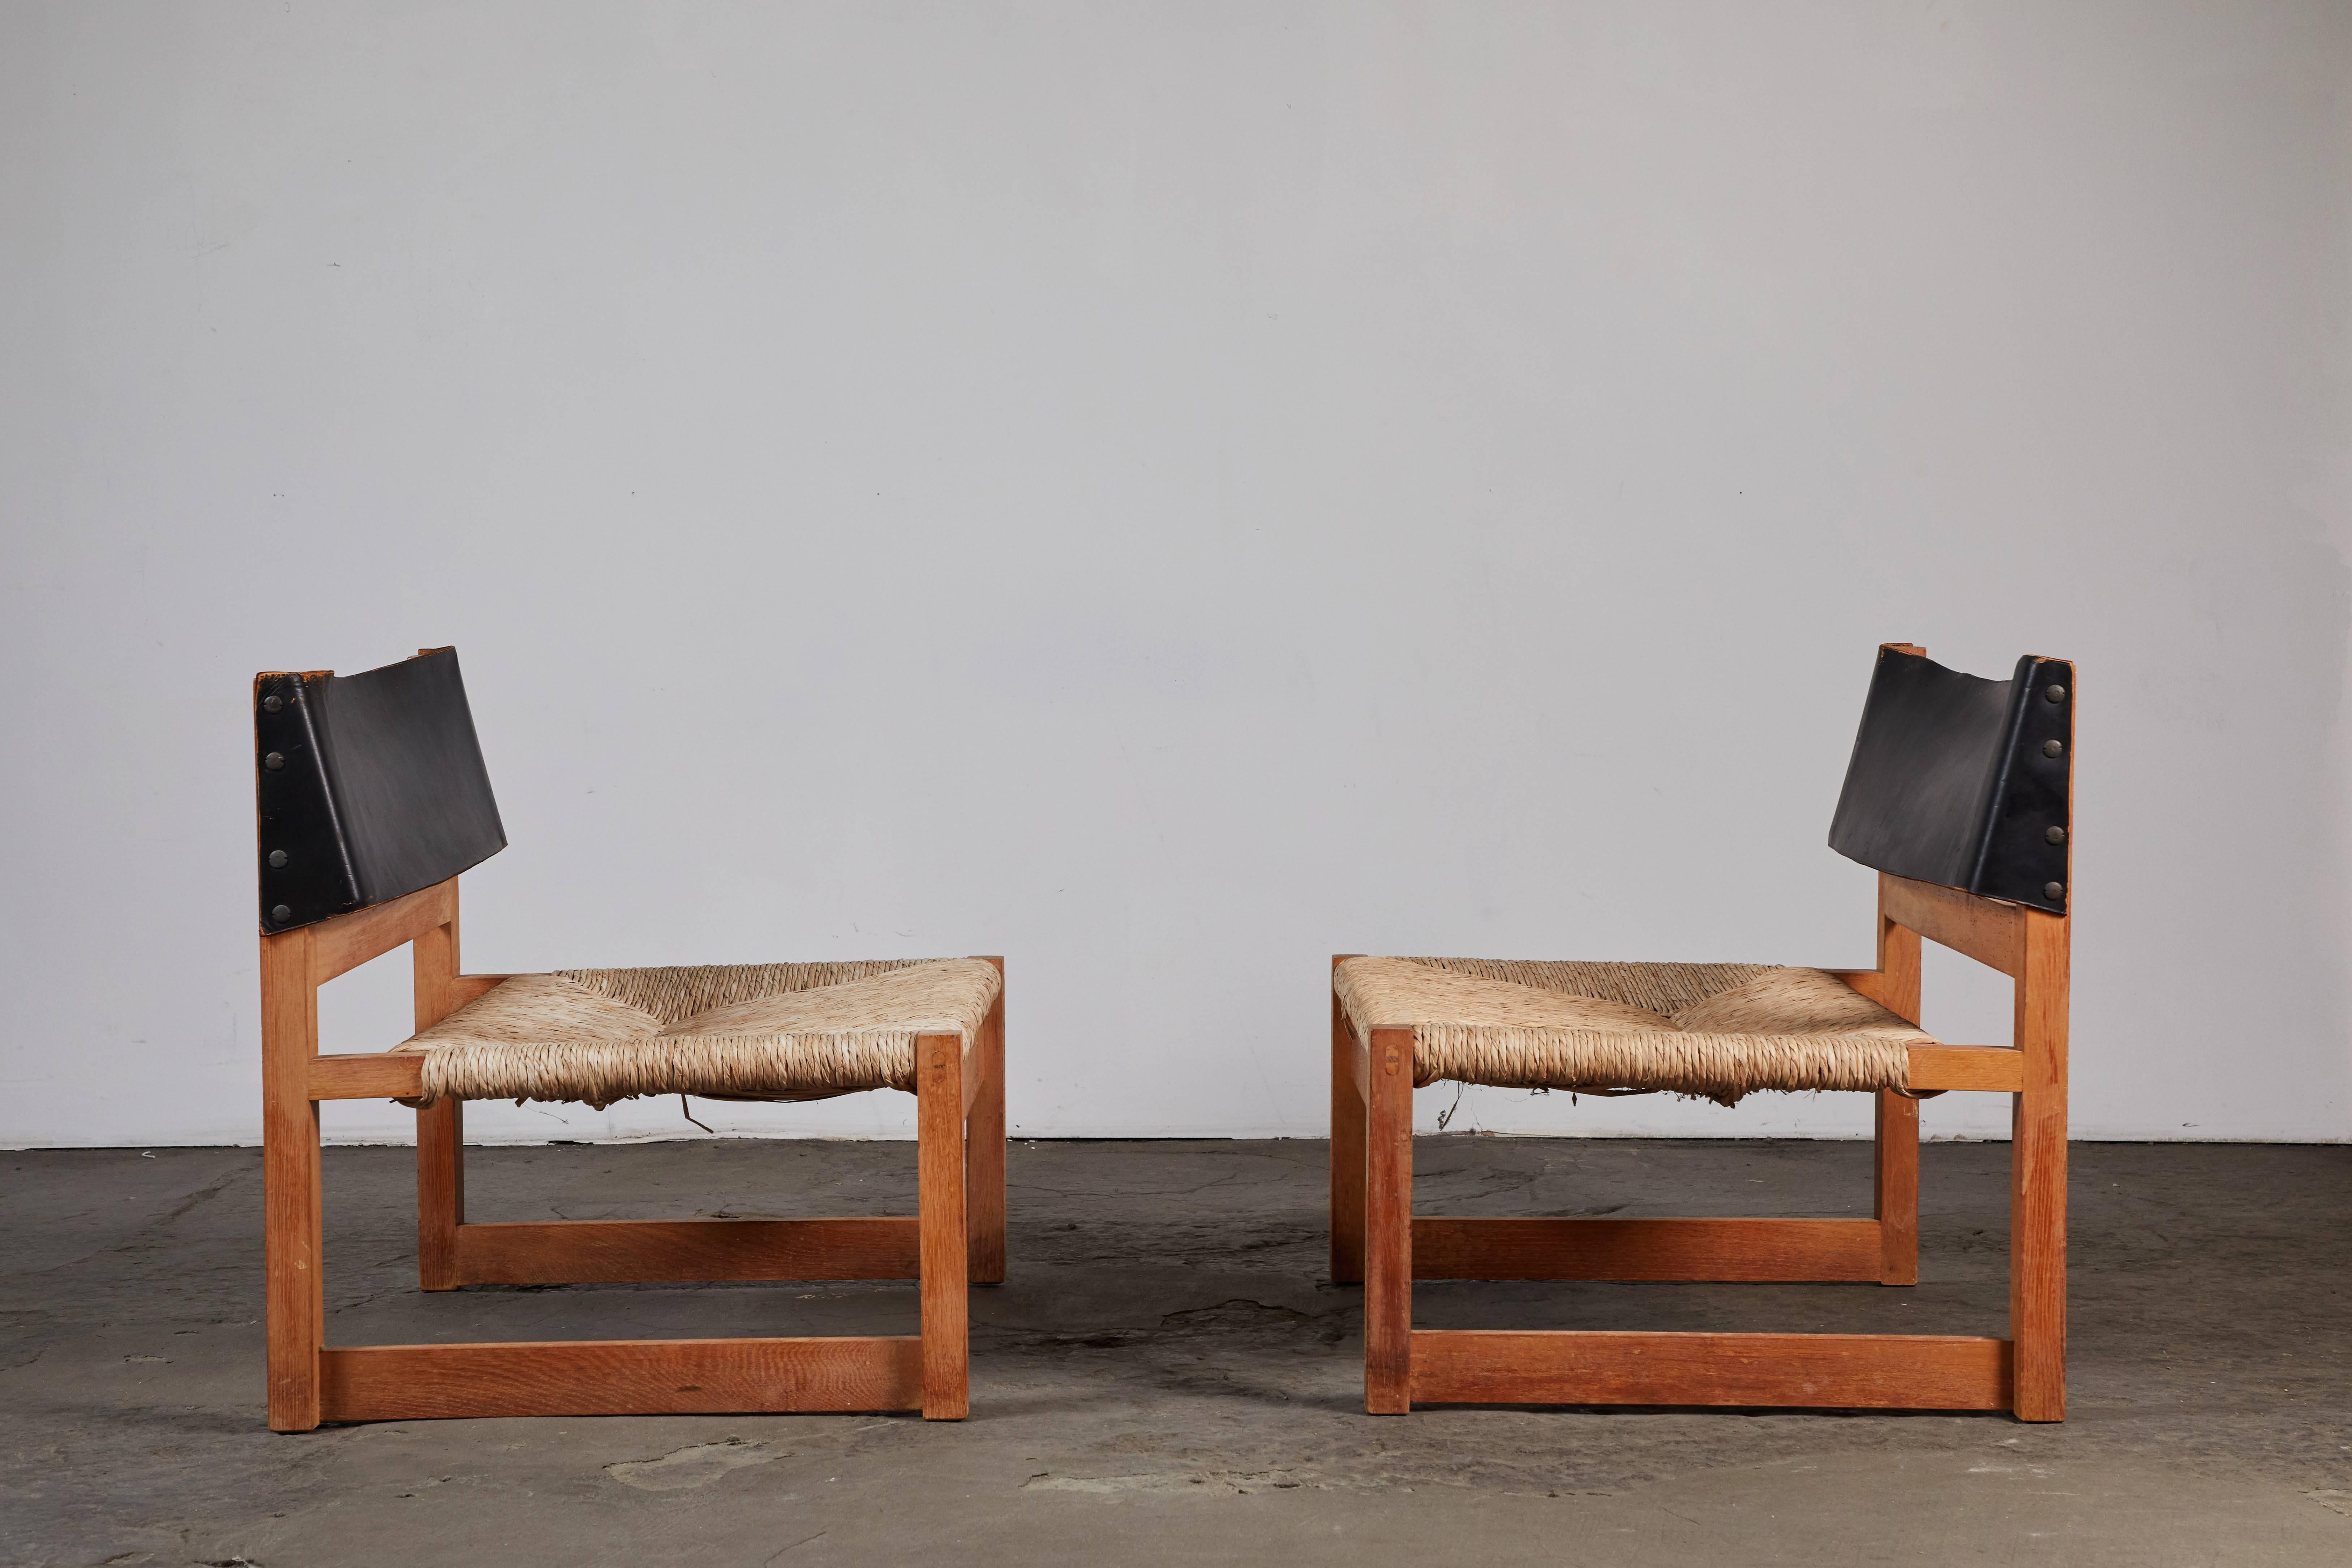 Pair of leather and caned seat wood chairs by Spanish architect, Javier Carvajal for Biosca. Made in Spain, circa 1963. Used in fashion designer, Loewe flagship in Barcelona in 1960s.